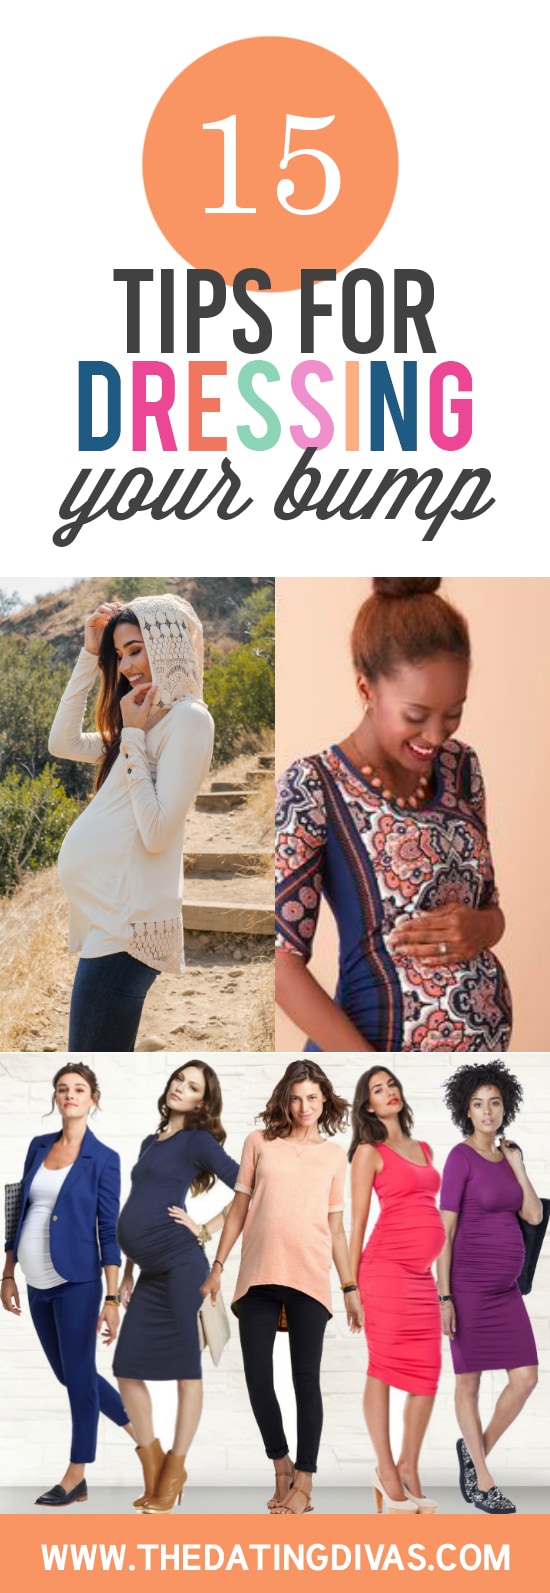 pregnancy clothing tips banner